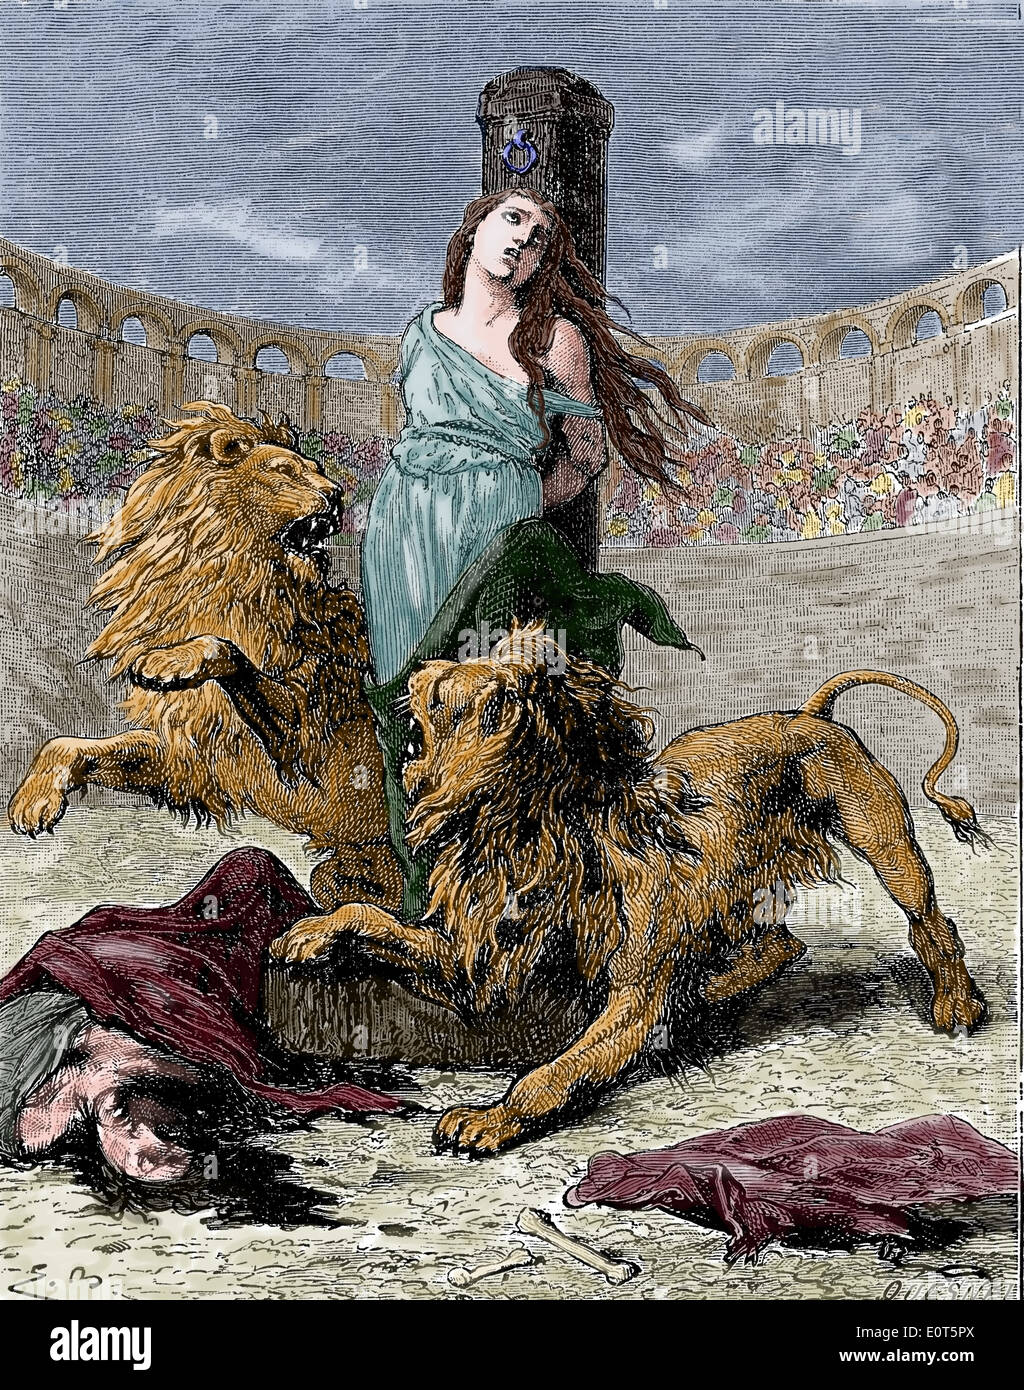 Christians given to the lions in the Roman amphitheater. Cyclopedia of Universal History, 1885. Later colouration. Stock Photo